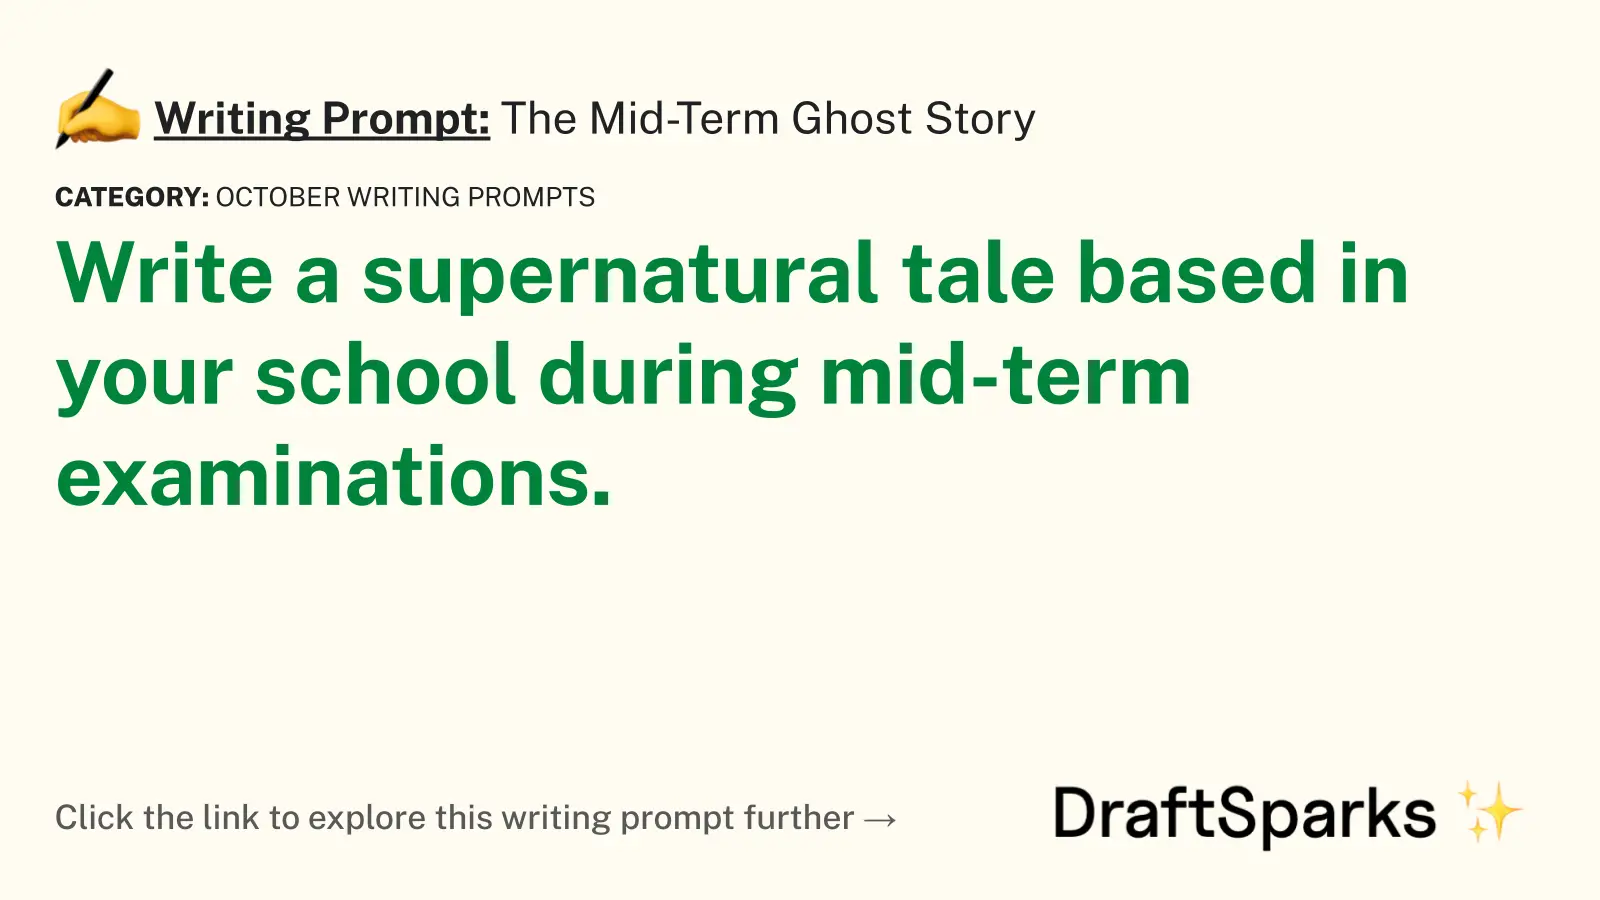 The Mid-Term Ghost Story